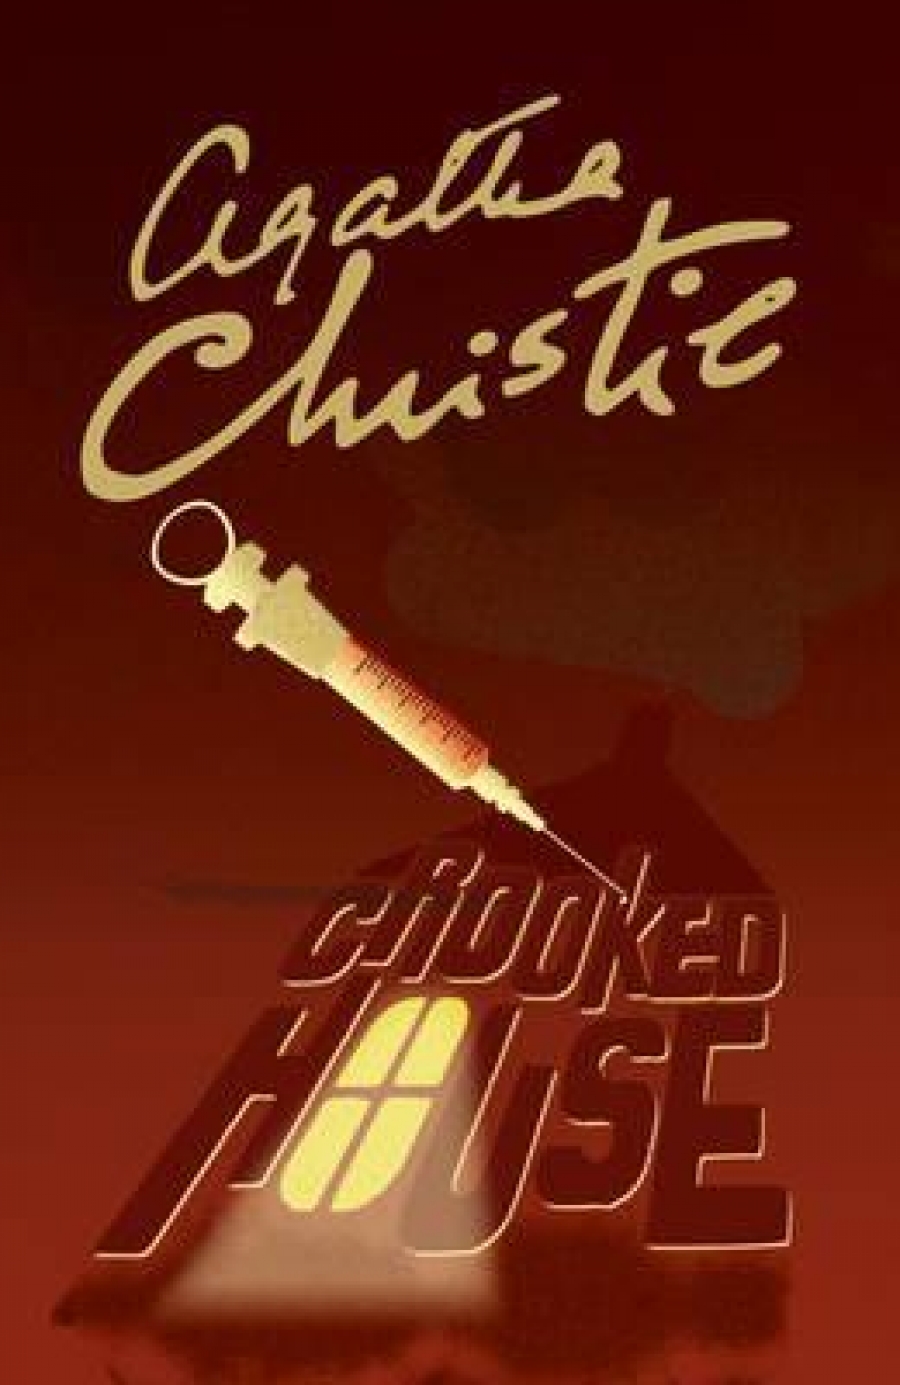 Christie Agatha Crooked House 